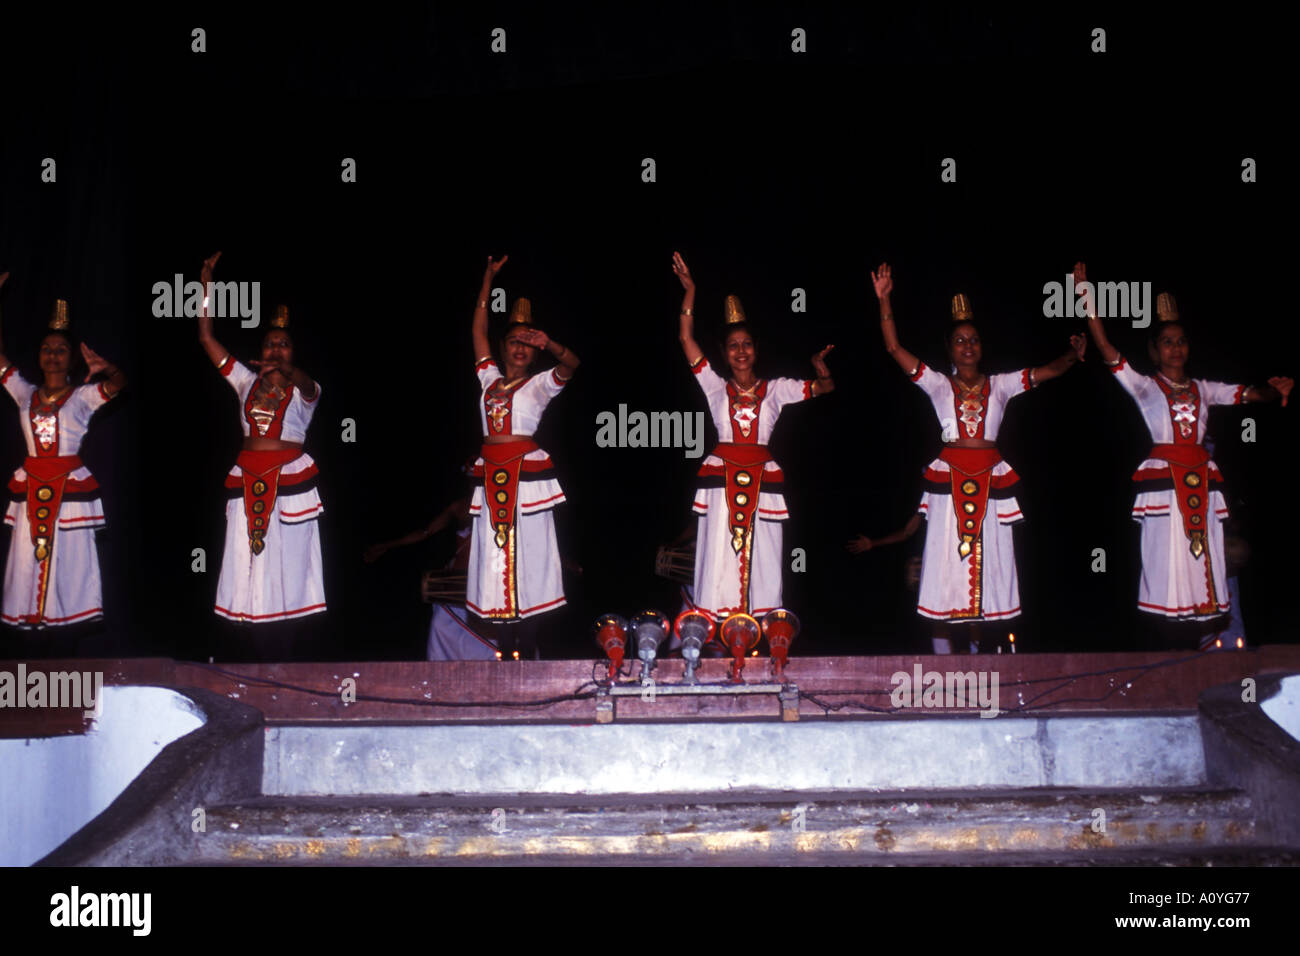 Sri Lankan dancing girls performs a traditional dance routine Stock Photo